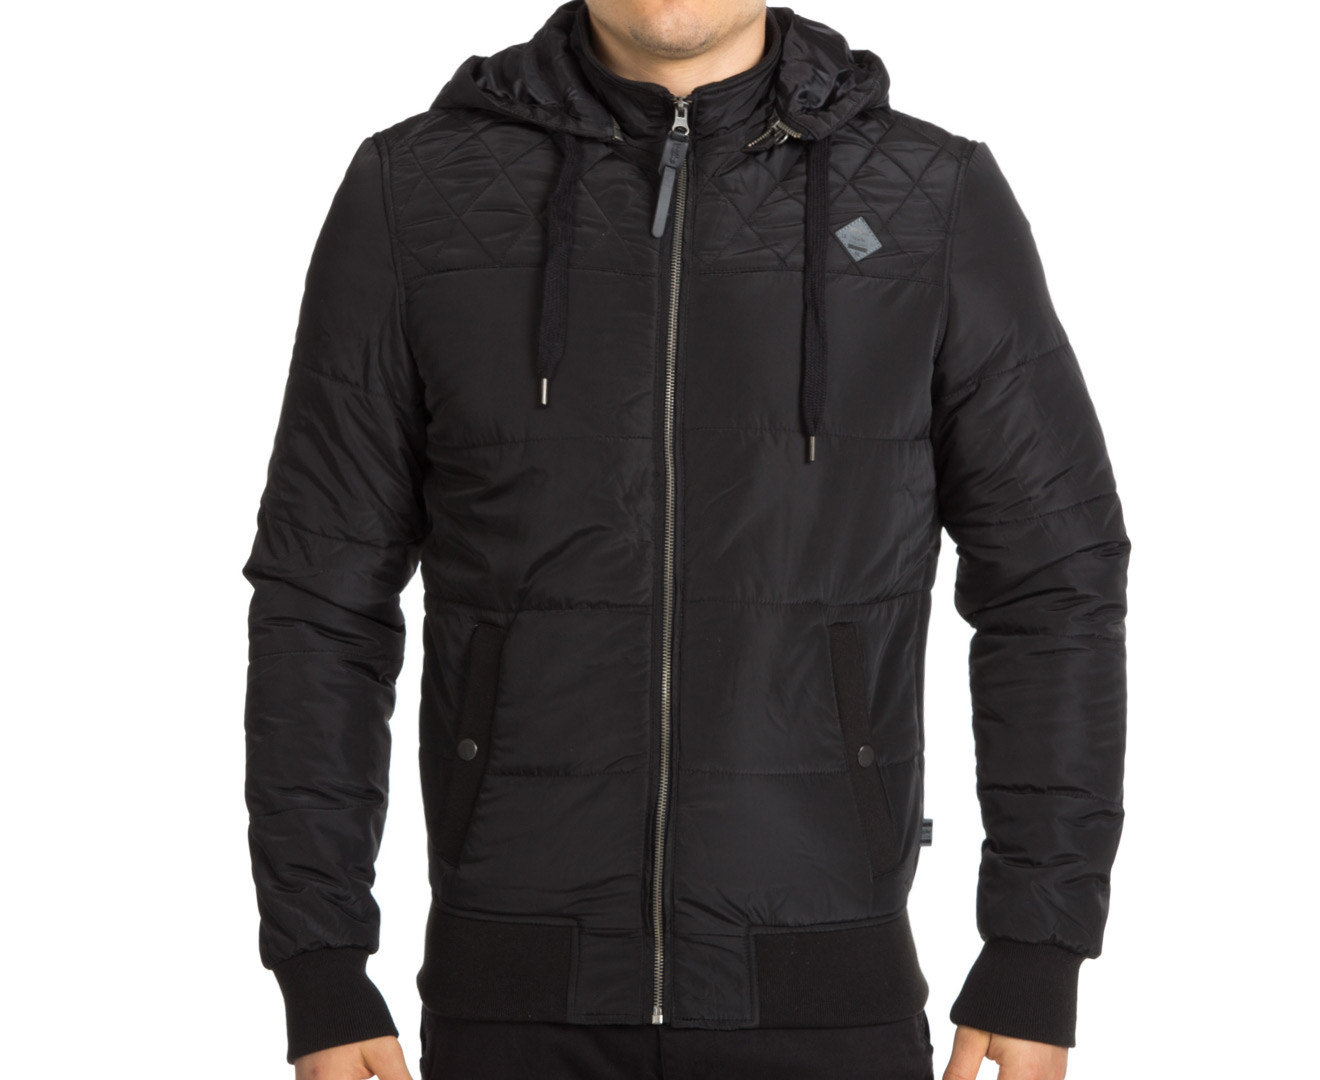 Mossimo Men's Teredo Puffer Jacket - Black | Great daily deals at ...